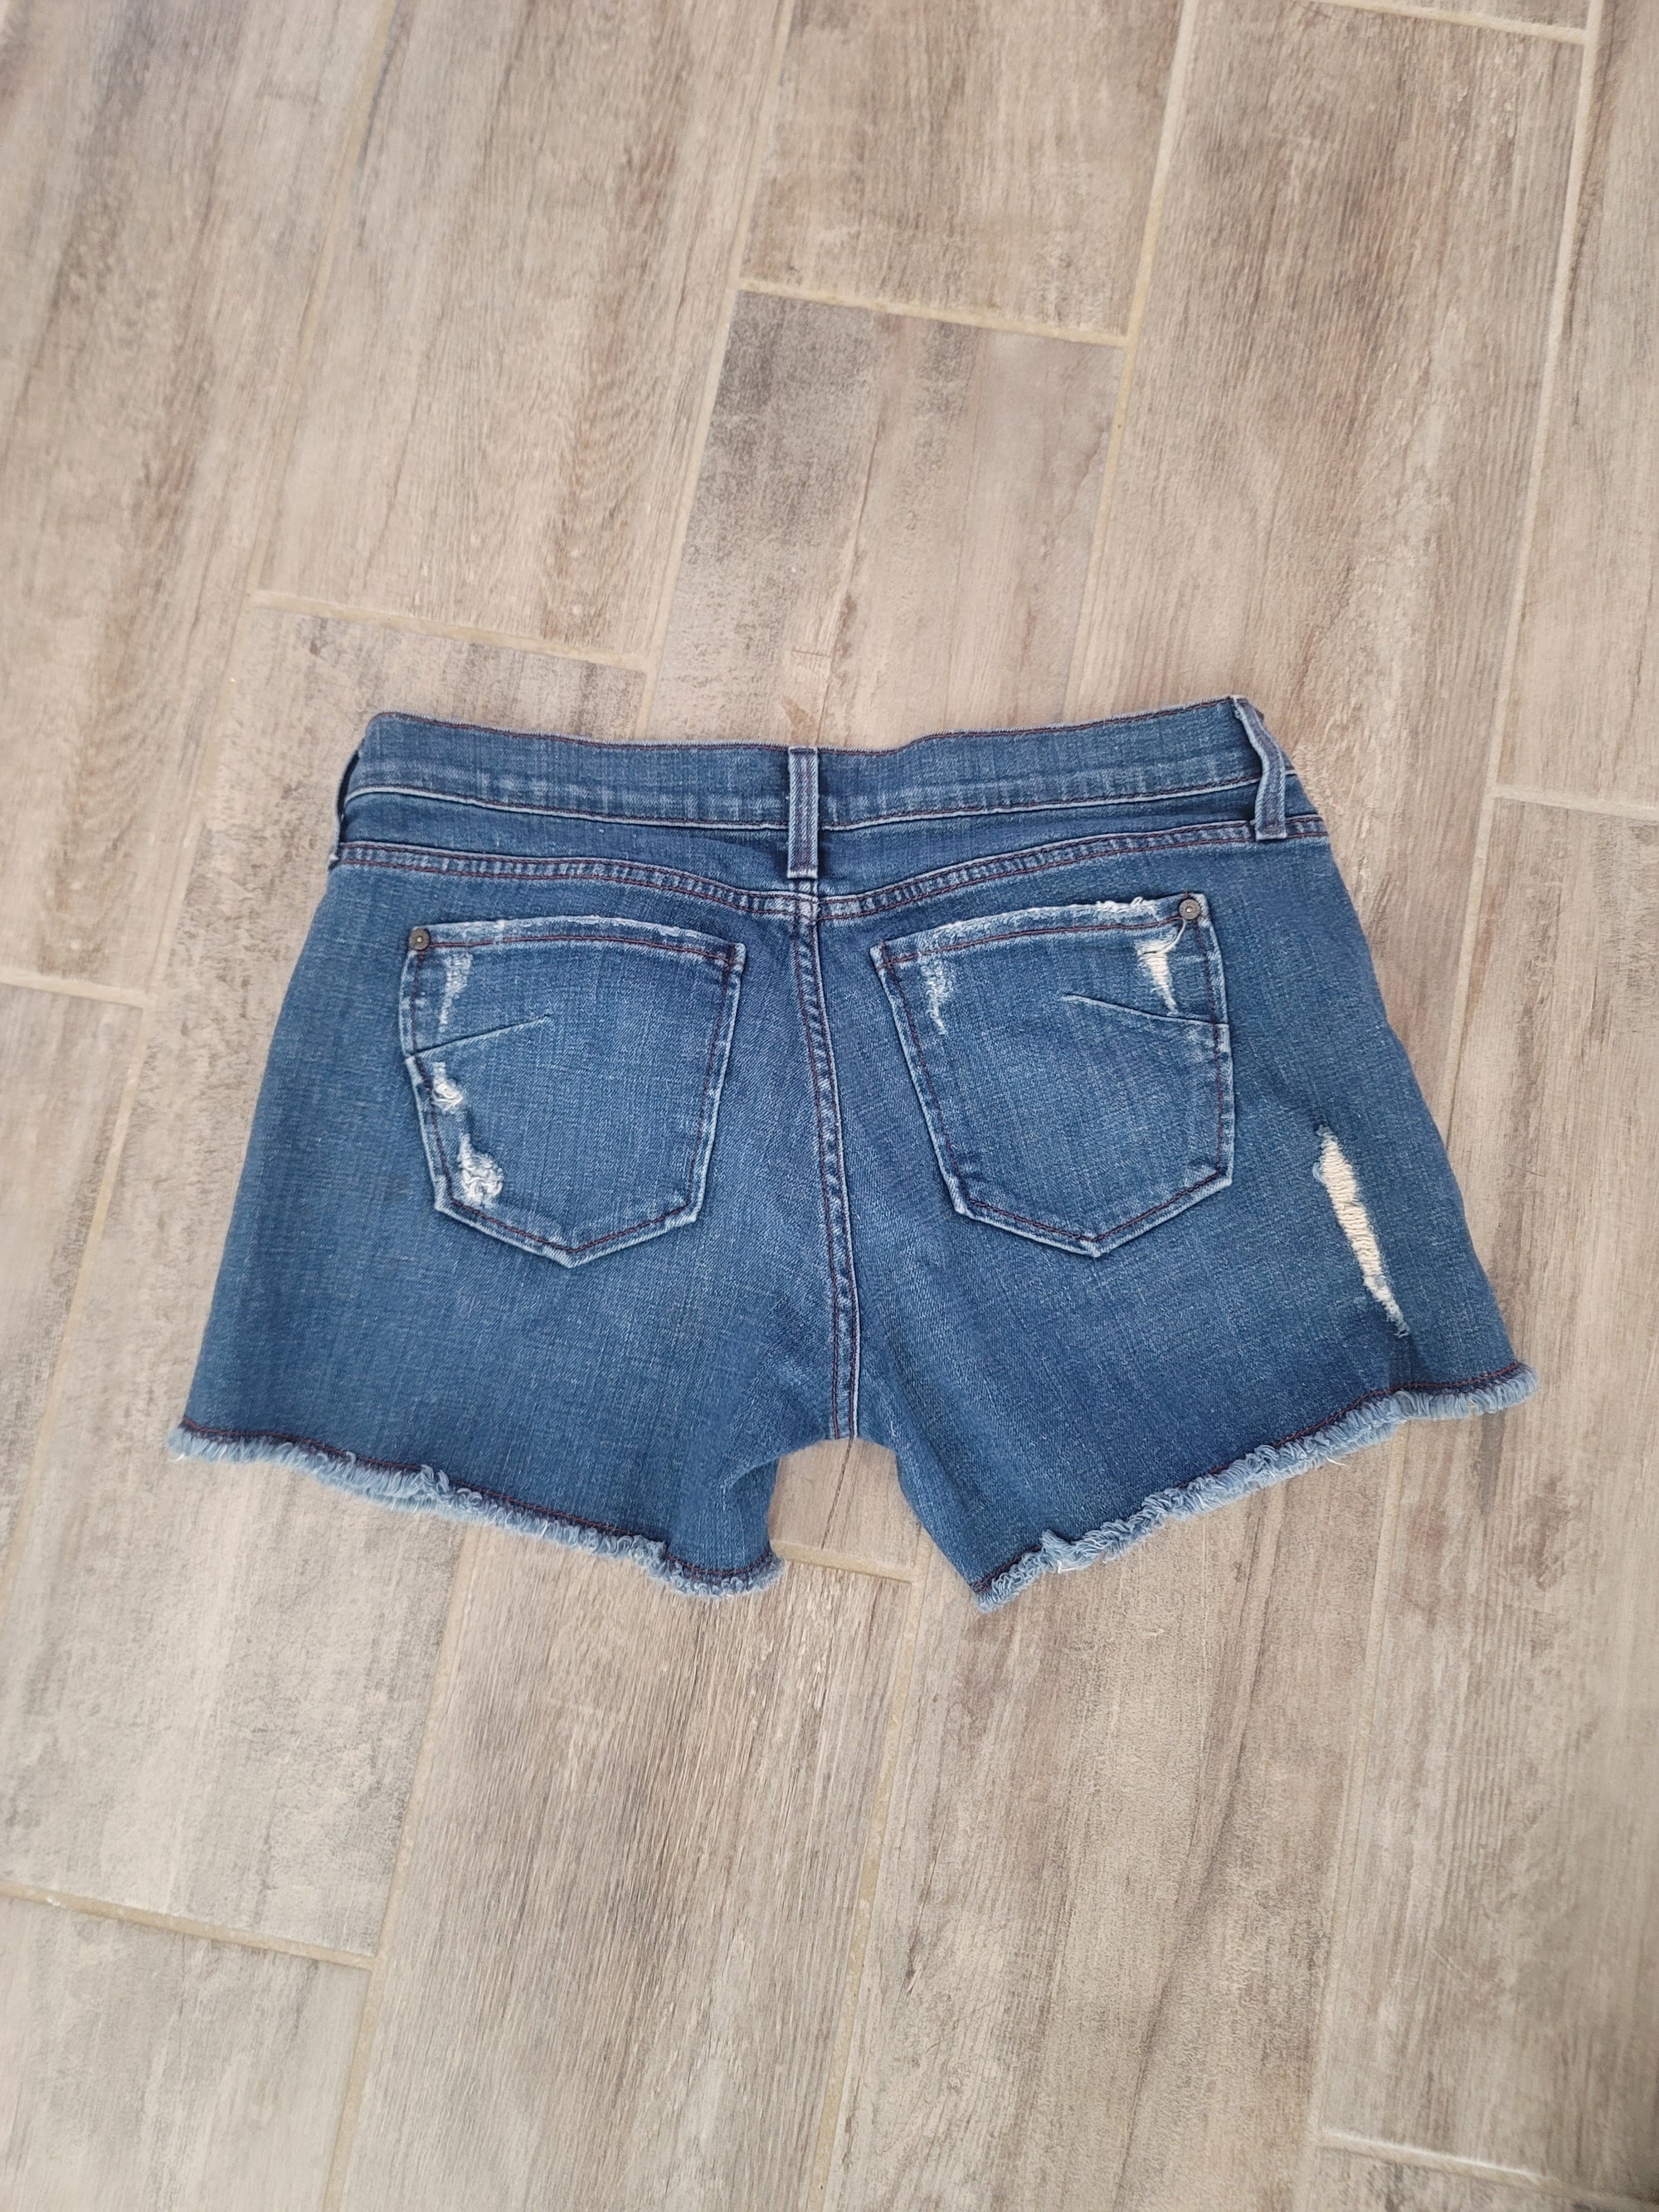 Indio James Jeans Shorty